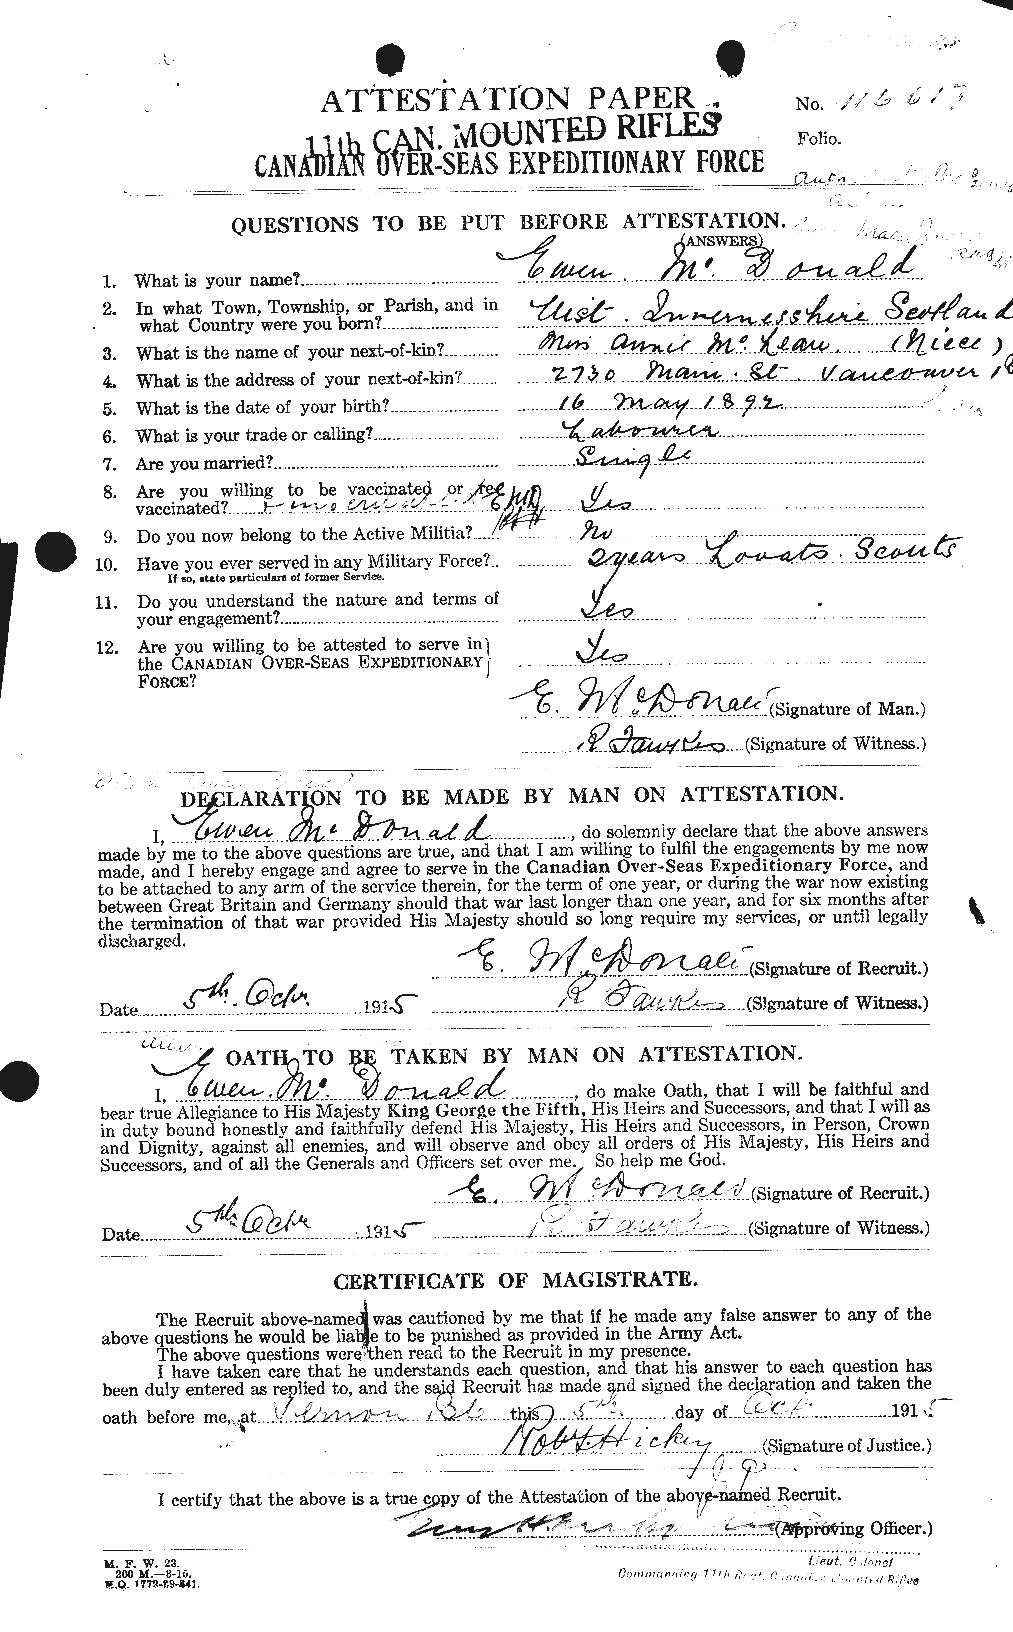 Personnel Records of the First World War - CEF 517387a